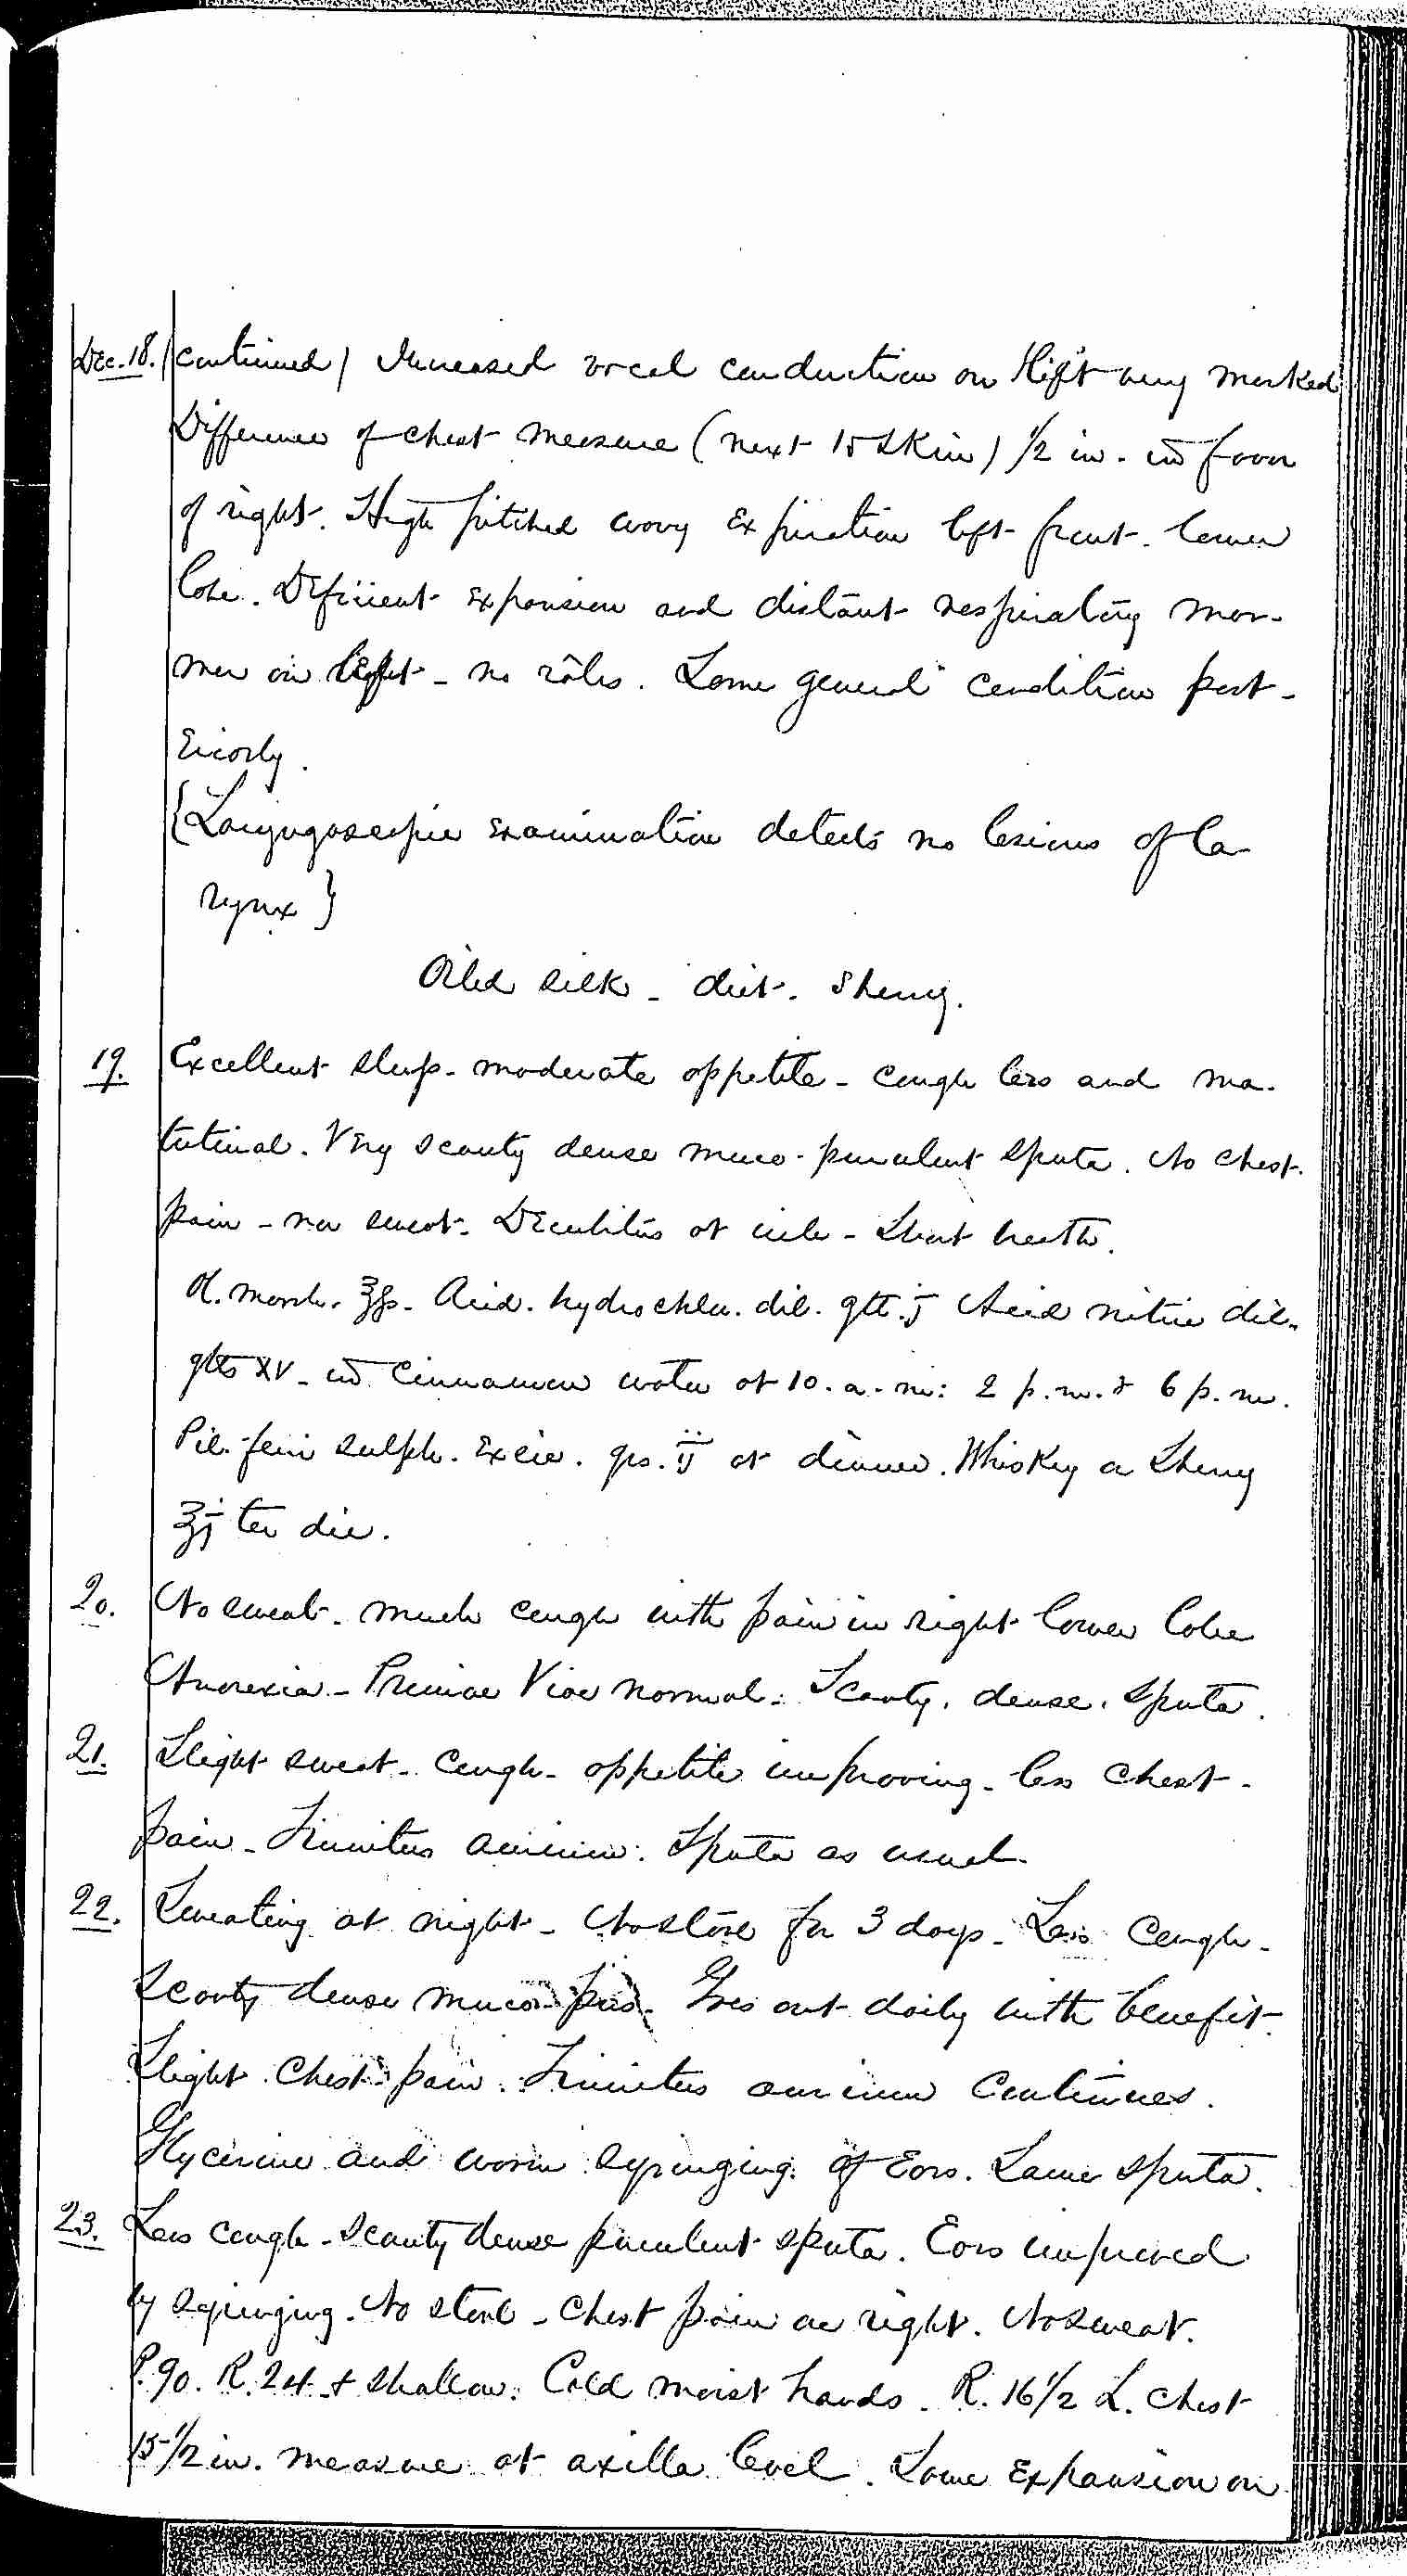 Entry for Peter C. Cheeks (page 3 of 16) in the log Hospital Tickets and Case Papers - Naval Hospital - Washington, D.C. - 1868-69